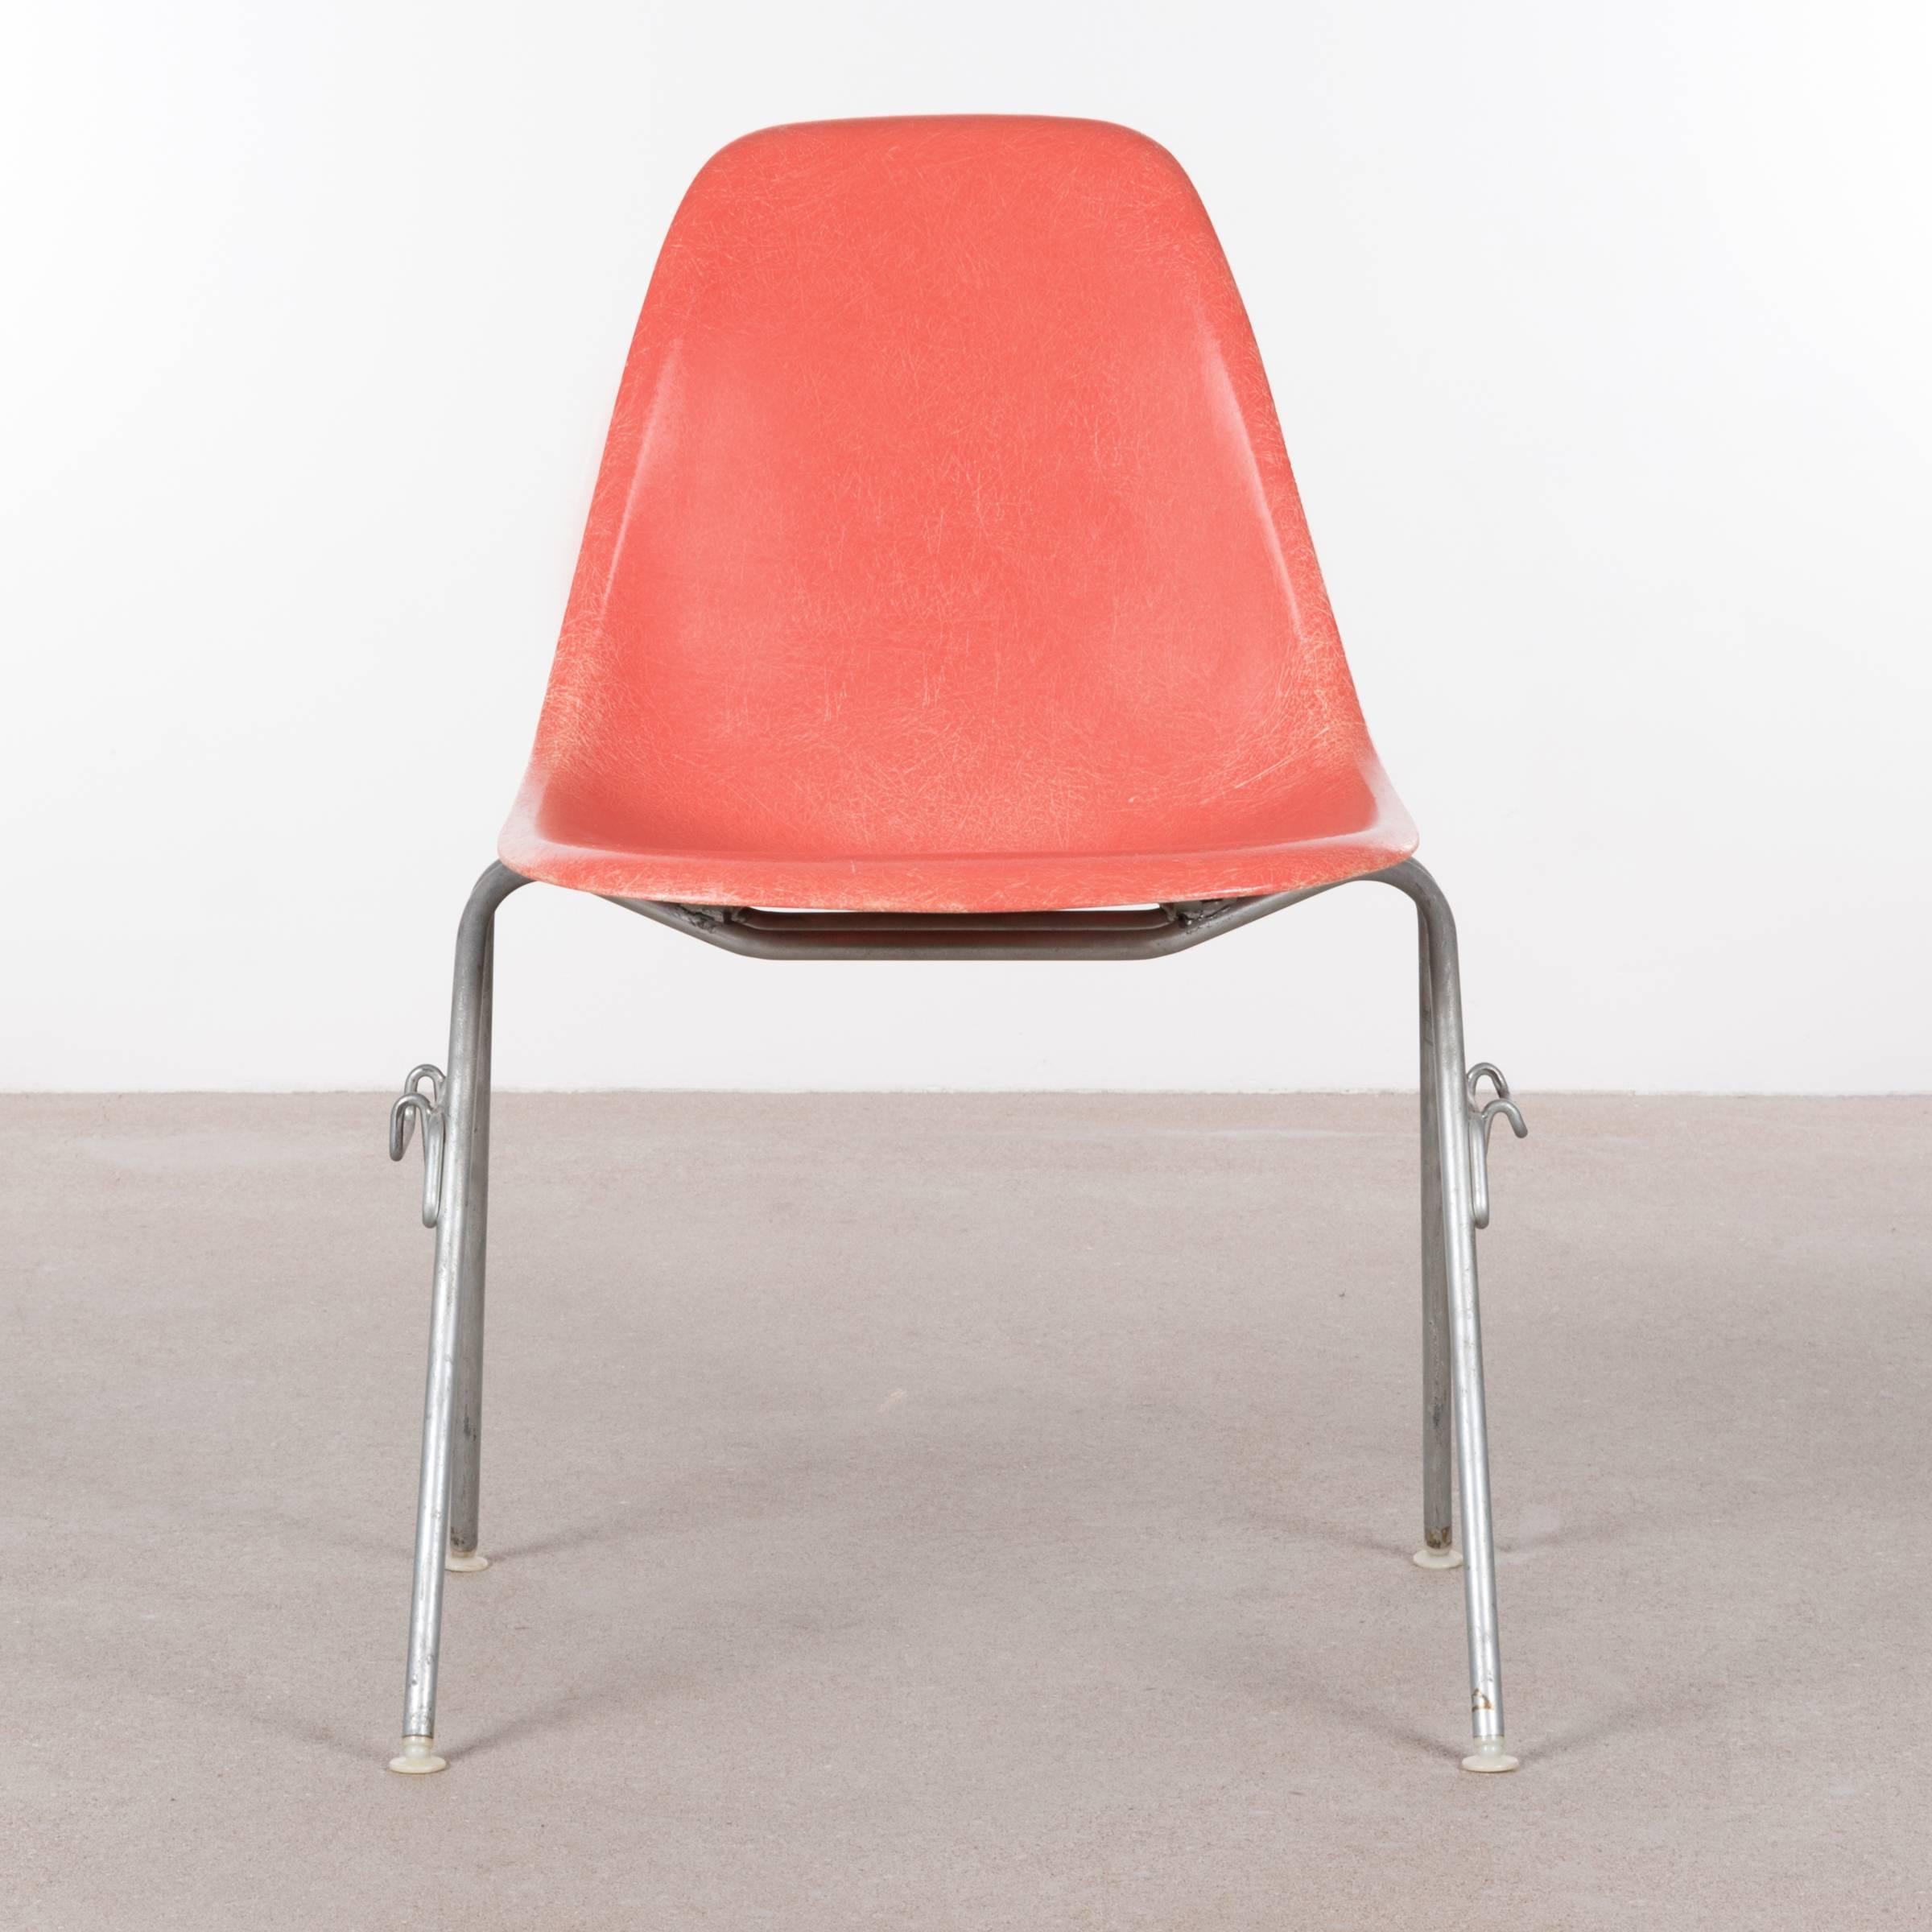 Iconic DSS (D)ining height (S)ide chairs with (S)tacking base in Salmon. The fiberglass shell is in very good vintage condition with only slight traces of use. Original zinc-plated steel base also in very good condition. The chairs are signed patent